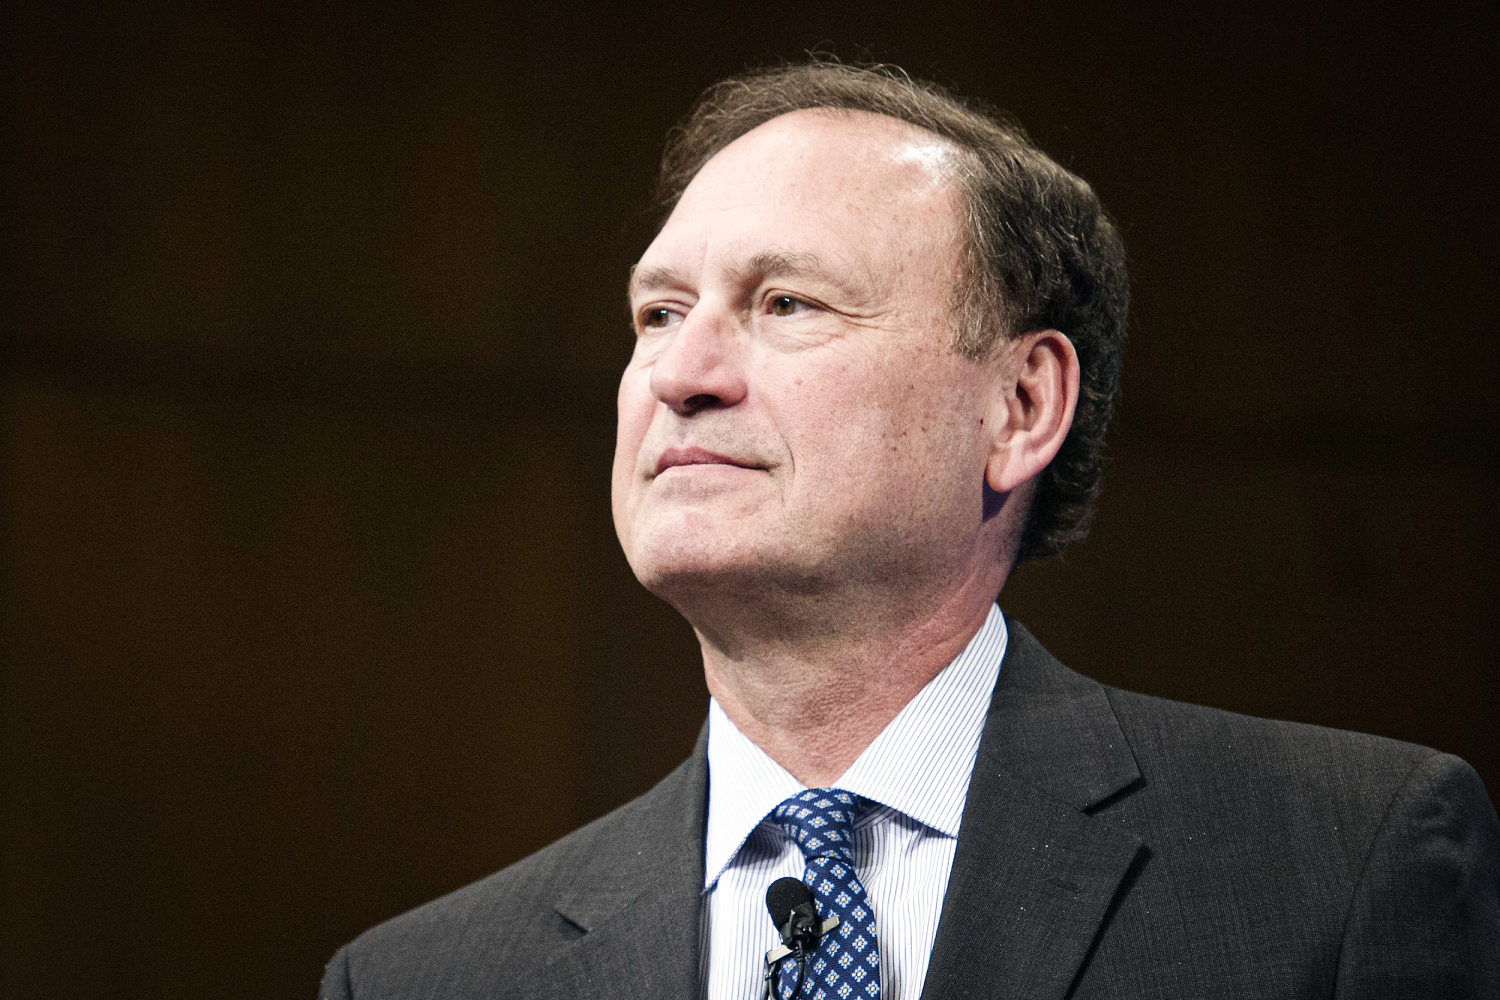 Justice Alito warns of declining support for freedom of speech on college campuses